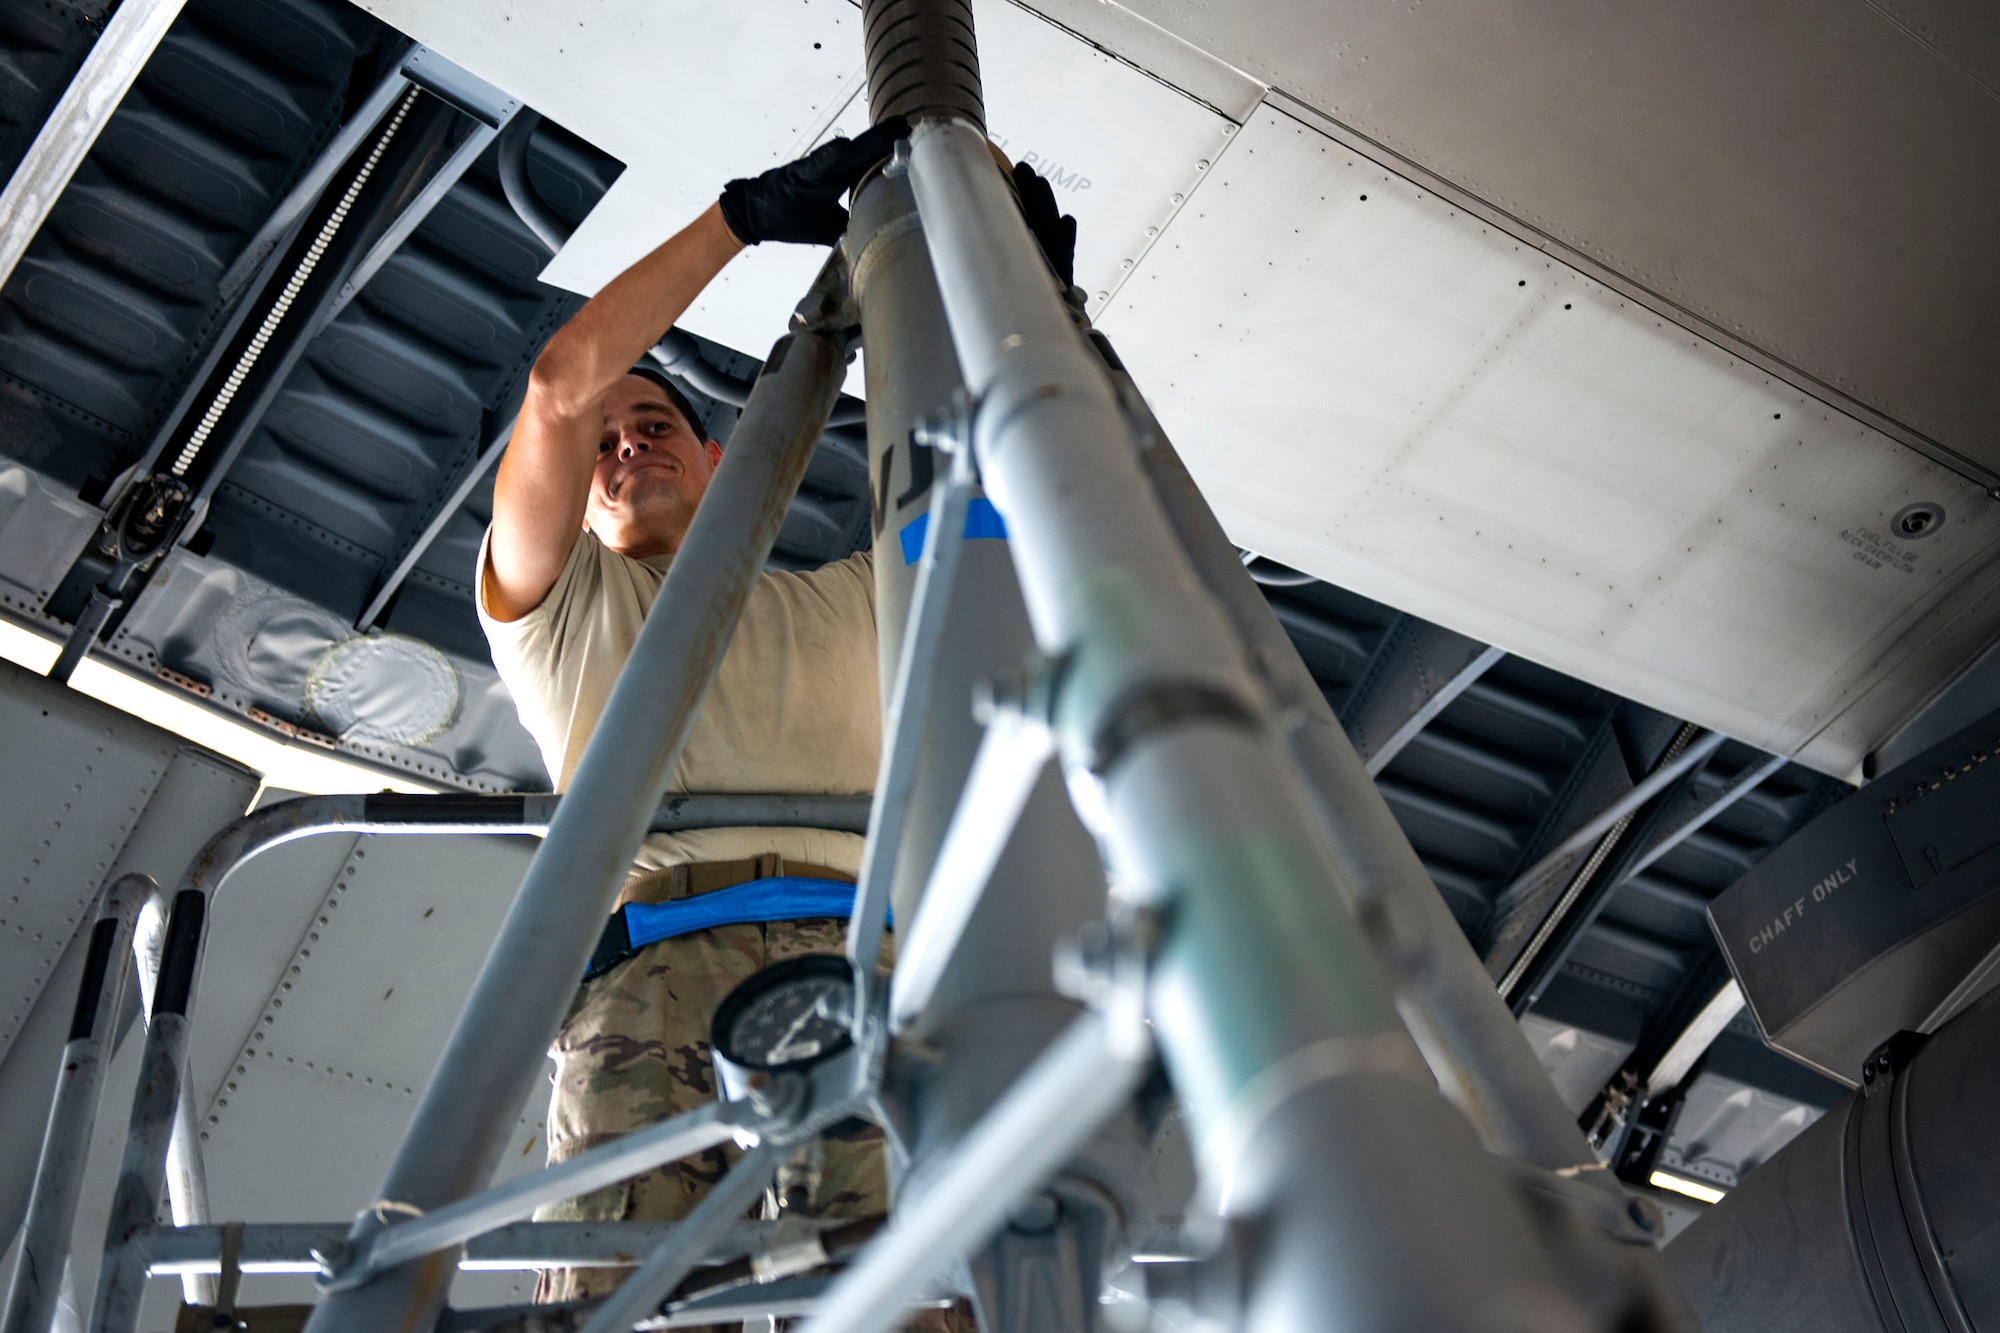 Airman 1st Class Pedro Gerena, 71st Aircraft Maintenance Unit crew chief, checks a ram lock on an aircraft jack during preparation of an HC-130J Combat King II for a situational awareness communication upgrade (SACU) modification Sept. 25, 2019, at Moody Air Force Base, Ga. This SACU will enhance the aircraft’s ability to communicate with personnel on the ground during search and rescue operations. (U.S. Air Force photo by Senior Airman Erick Requadt)